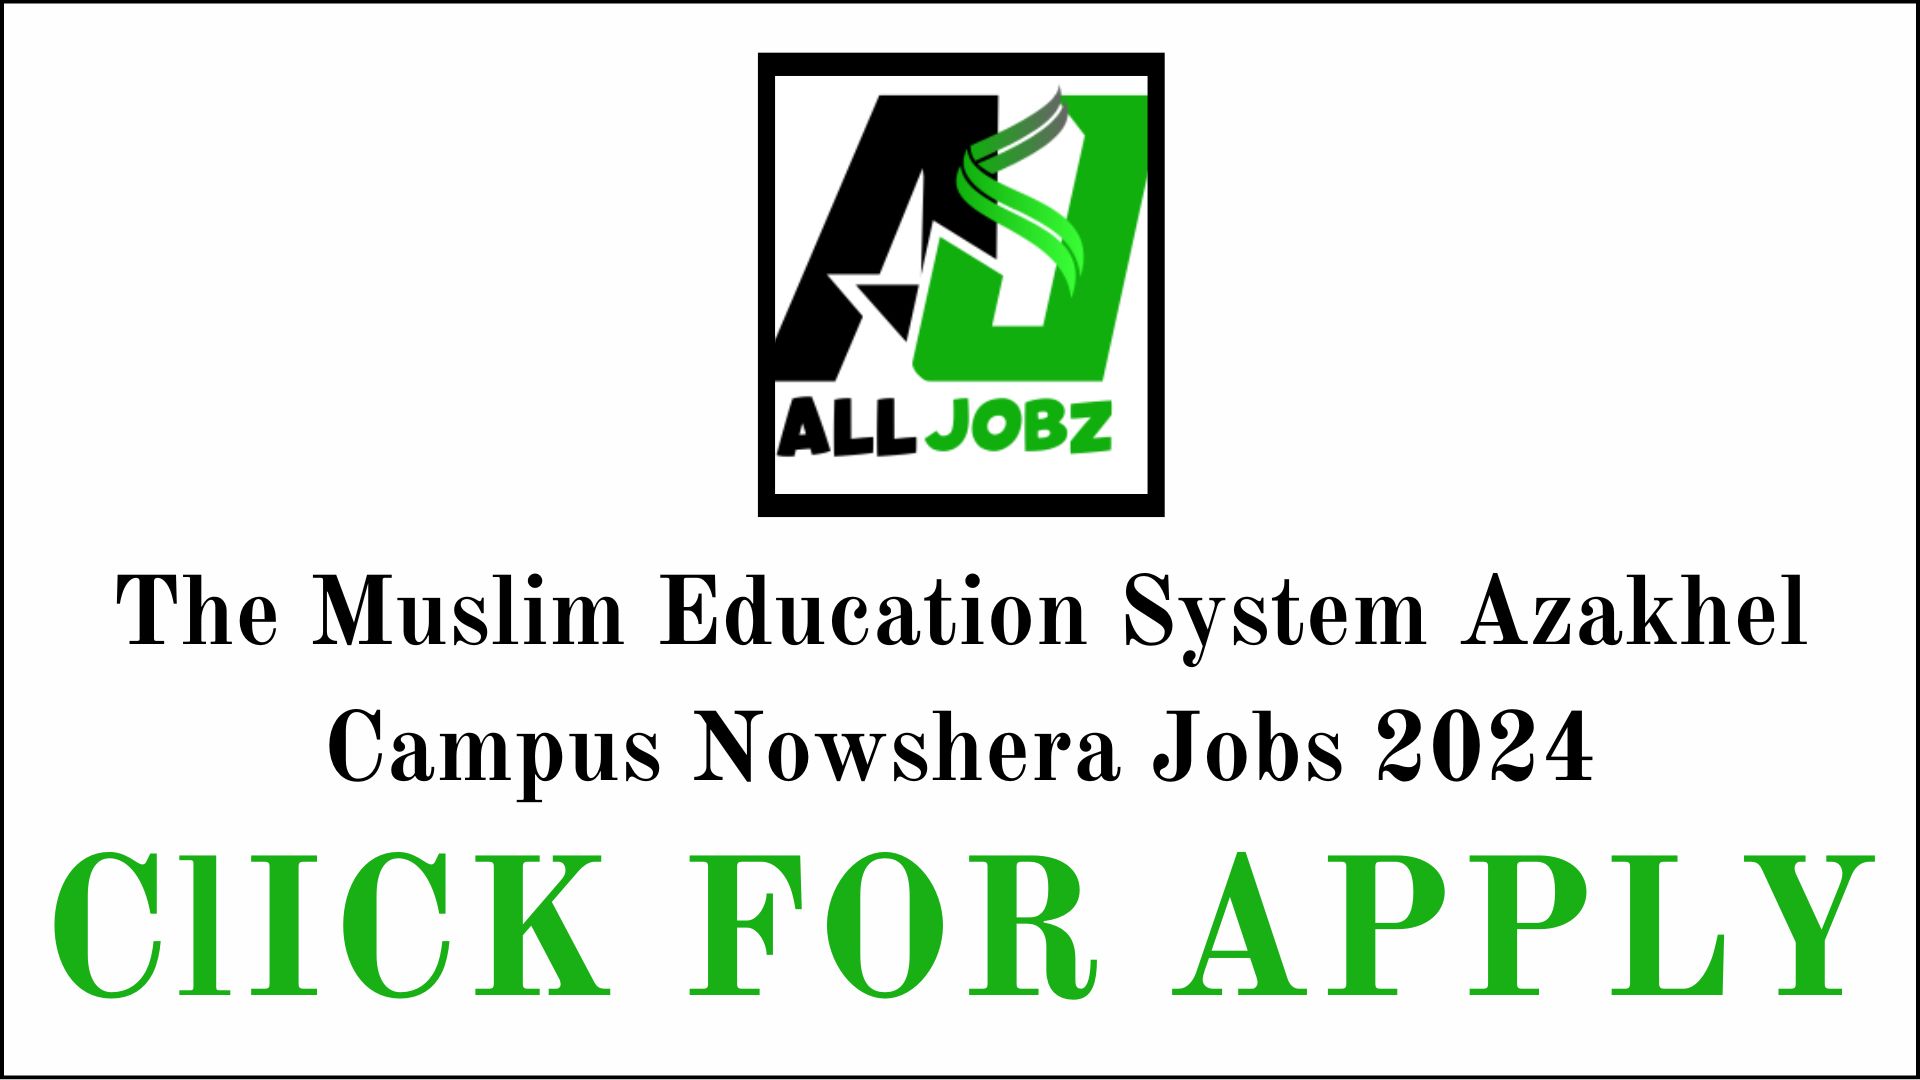 The Muslim Education System Azakhel Campus Nowshera Jobs, The Muslim Education System Azakhel Campus Nowshera Jobs 2024, The Muslim Education System Azakhel Campus Nowshera Jobs 2024 Result. These Opportunities Are Geared Towards Individuals Who Are Passionate About Education And Looking To Contribute To A Reputable Institution. Below Are The Details For The Available Positions, Qualifications, And Application Process. The Muslim Education System Azakhel Campus Nowshera Jobs, The Muslim Education System Azakhel Campus Nowshera Jobs 2024, The Muslim Education System Azakhel Campus Nowshera Jobs 2024 Result, The Muslim Education System Azakhel Campus Nowshera Jobs 2024 Online, The Muslim Education System Azakhel Campus Nowshera Jobs 2024 Apply, Female Teaching Jobs In Nowshera, Muslim Education System Abbottabad Jobs, Nowshera Virkan Jobs, The Muslim Education System Azakhel Campus Nowshera Jobs Online,